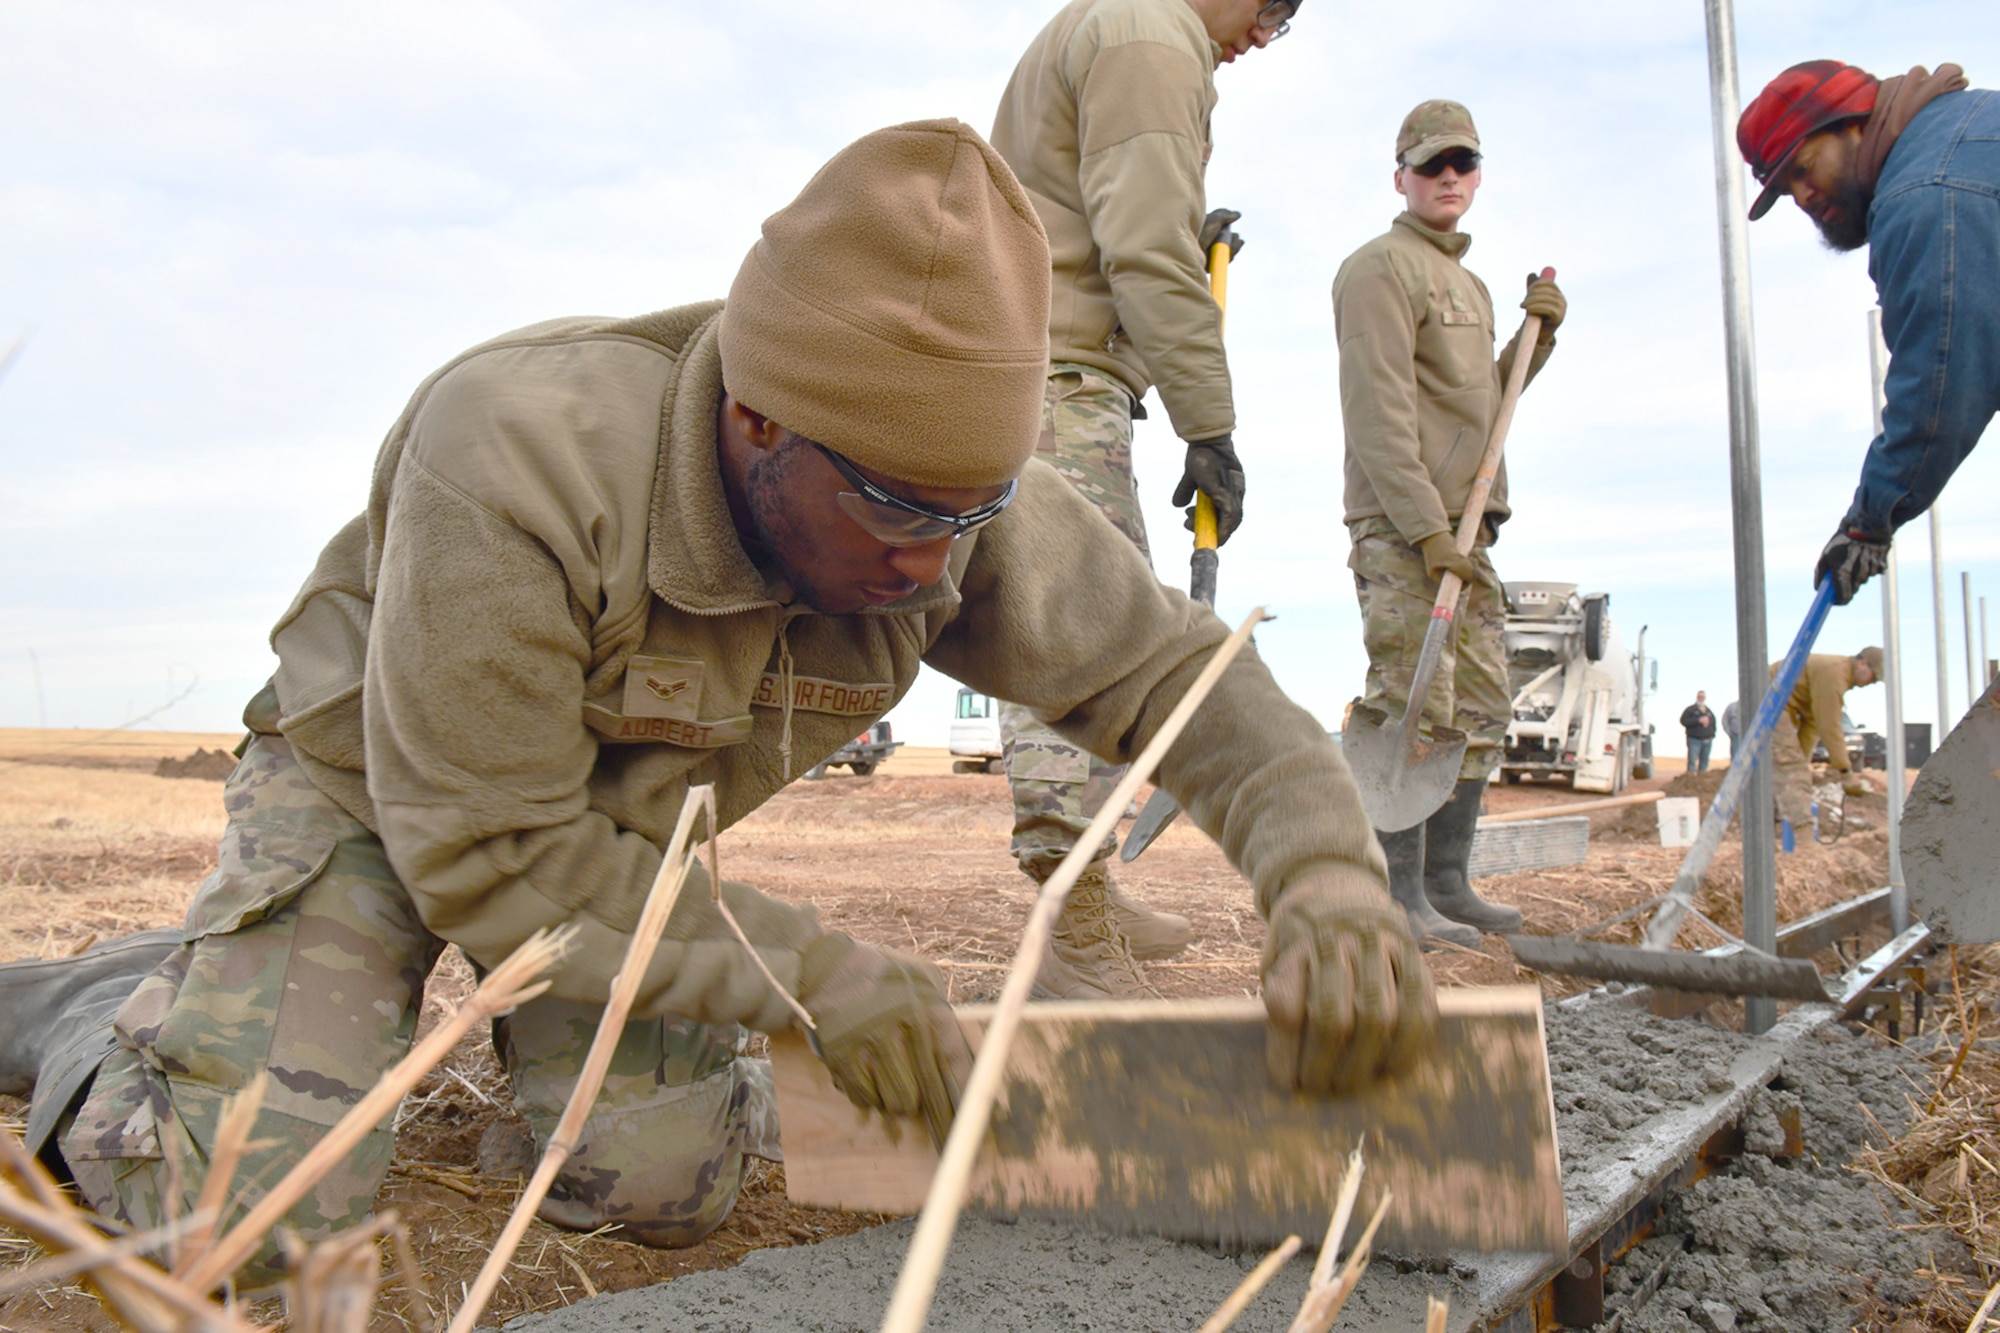 U.S. Air Force Airman 1st Class Miquel Aubert, 97th Civil Engineer Squadron (CES) pavements and construction equipment apprentice, uses a board to float freshly poured concrete at Altus Air Force Base, Oklahoma, Dec. 9, 2021. The concrete is the foundation of a frangible flood gate designed by the 97 CES to prevent damage to the base’s permit fence during rain events. (U.S. Air Force photo by Tech. Sgt. Robert Sizelove)